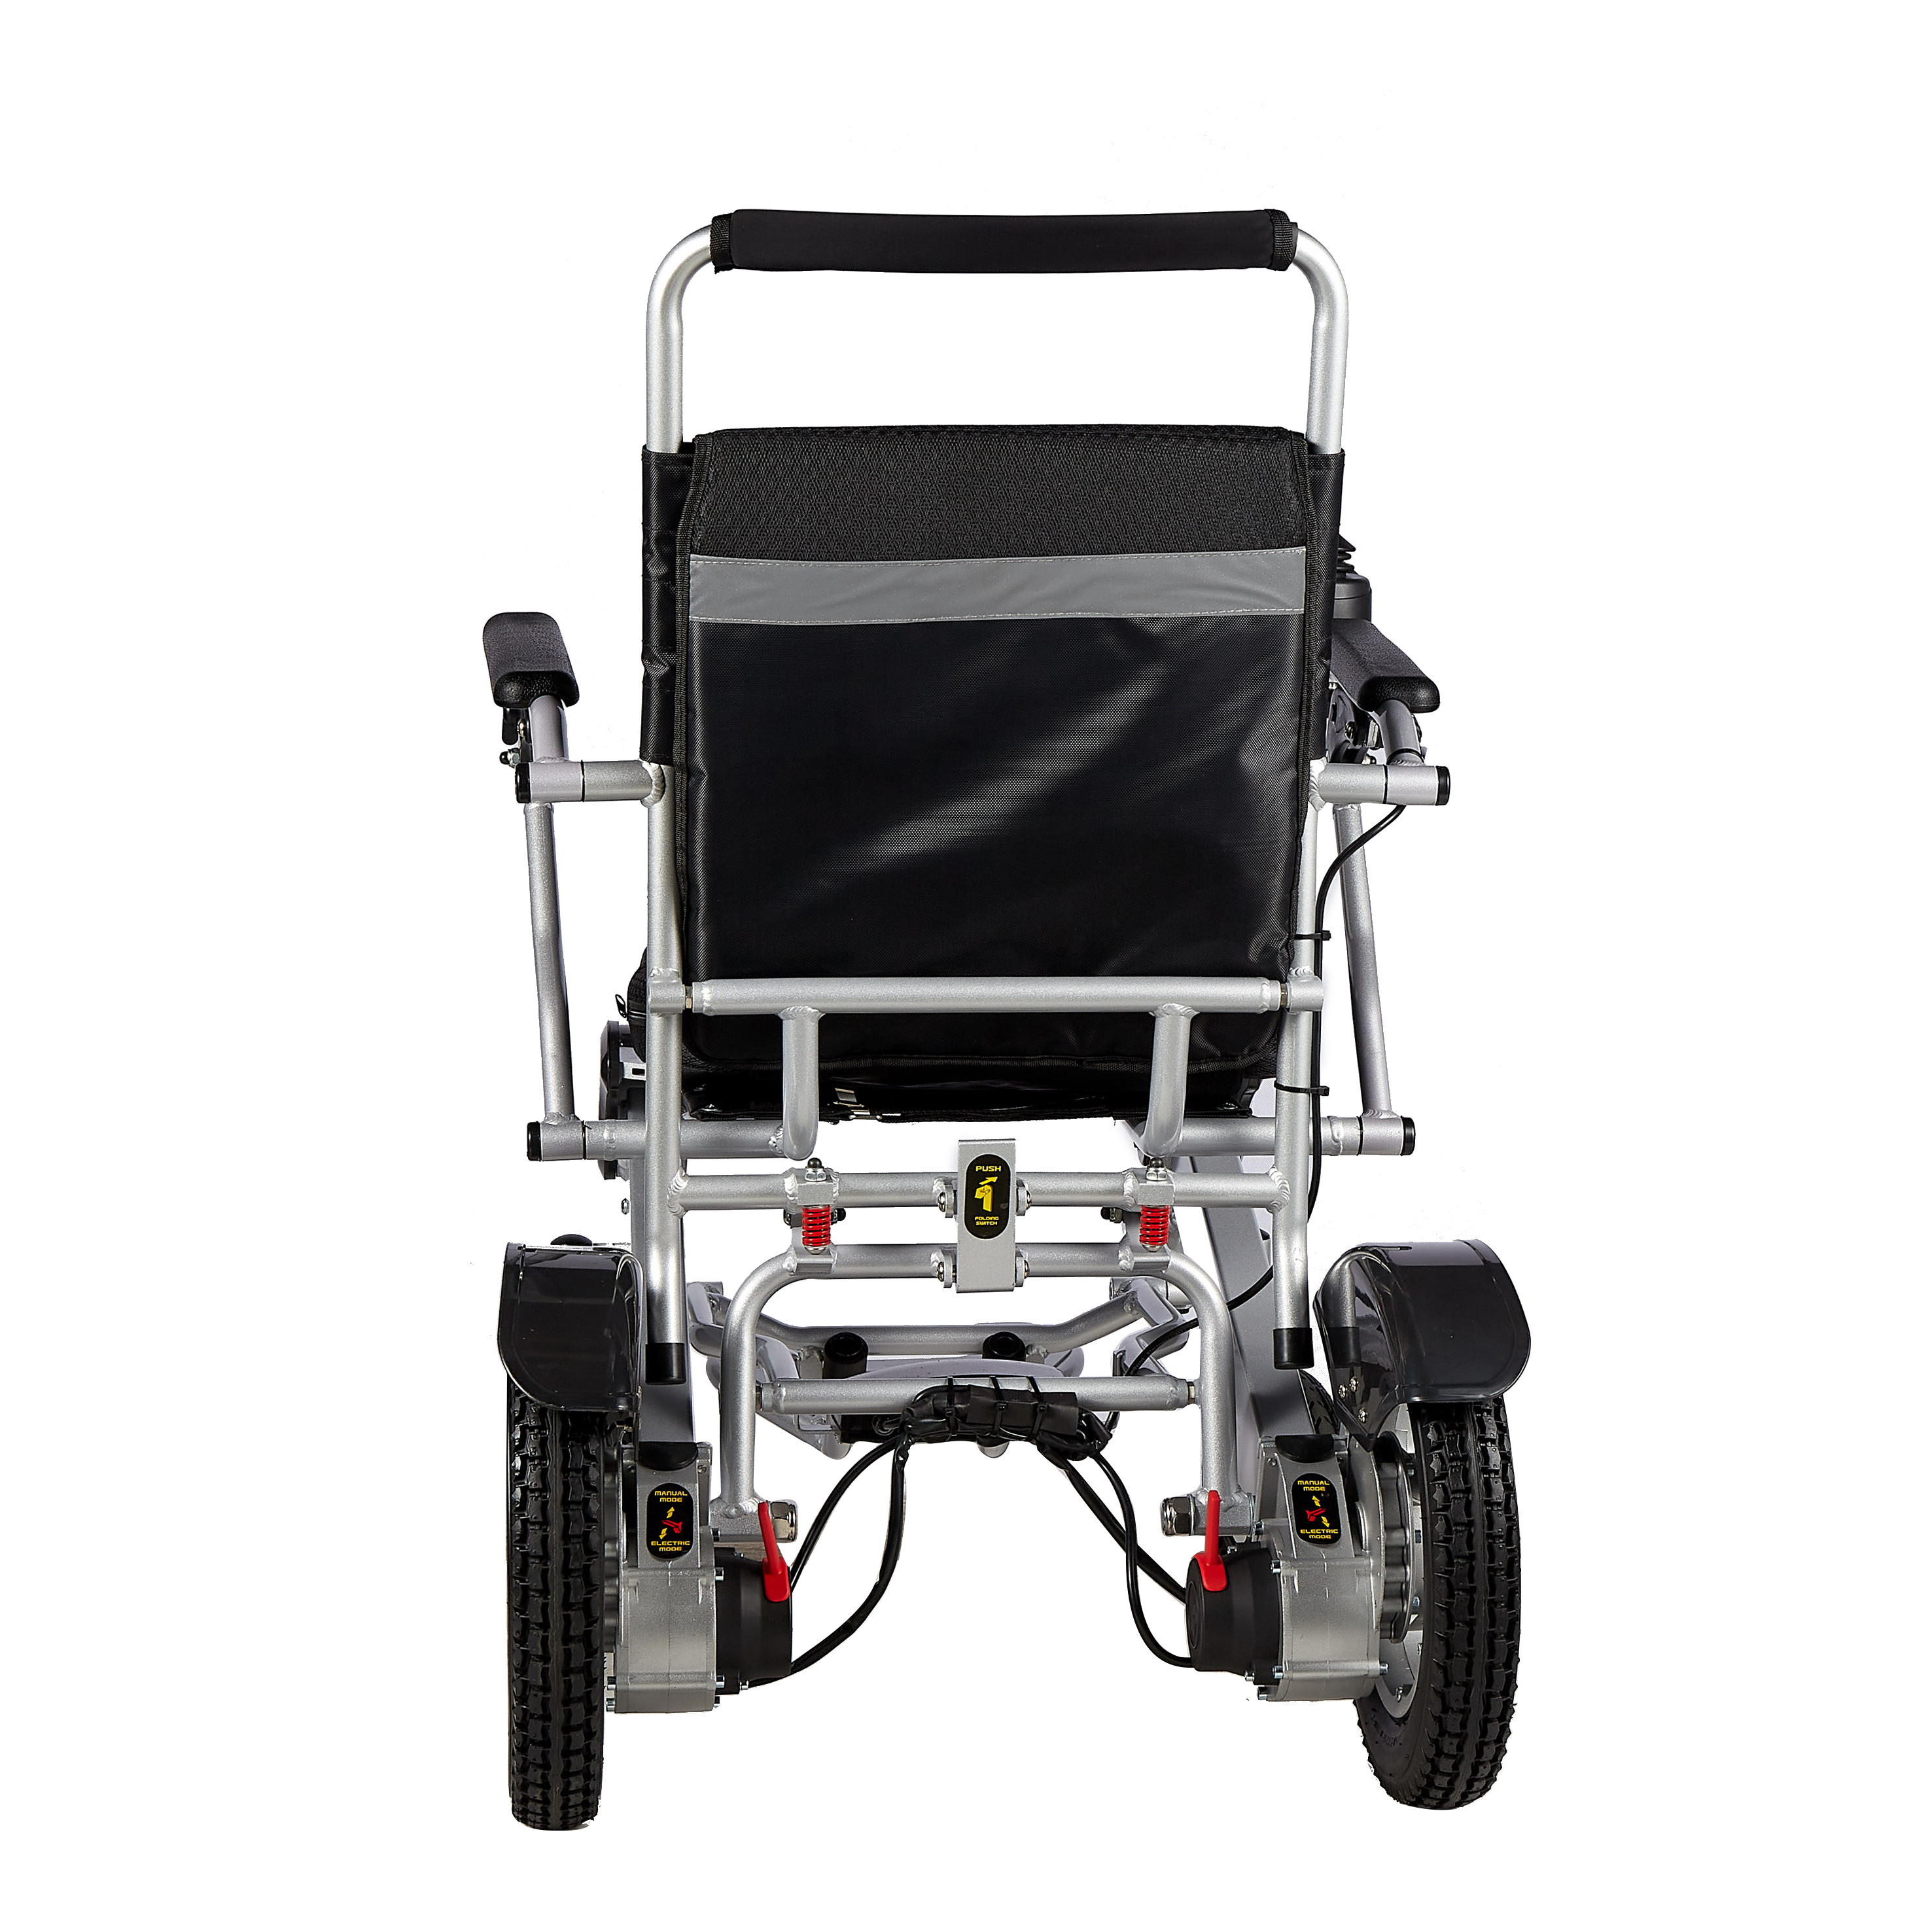 folding electric wheelchair supplier:Things to pay attention to when purchasing electric wheelchair